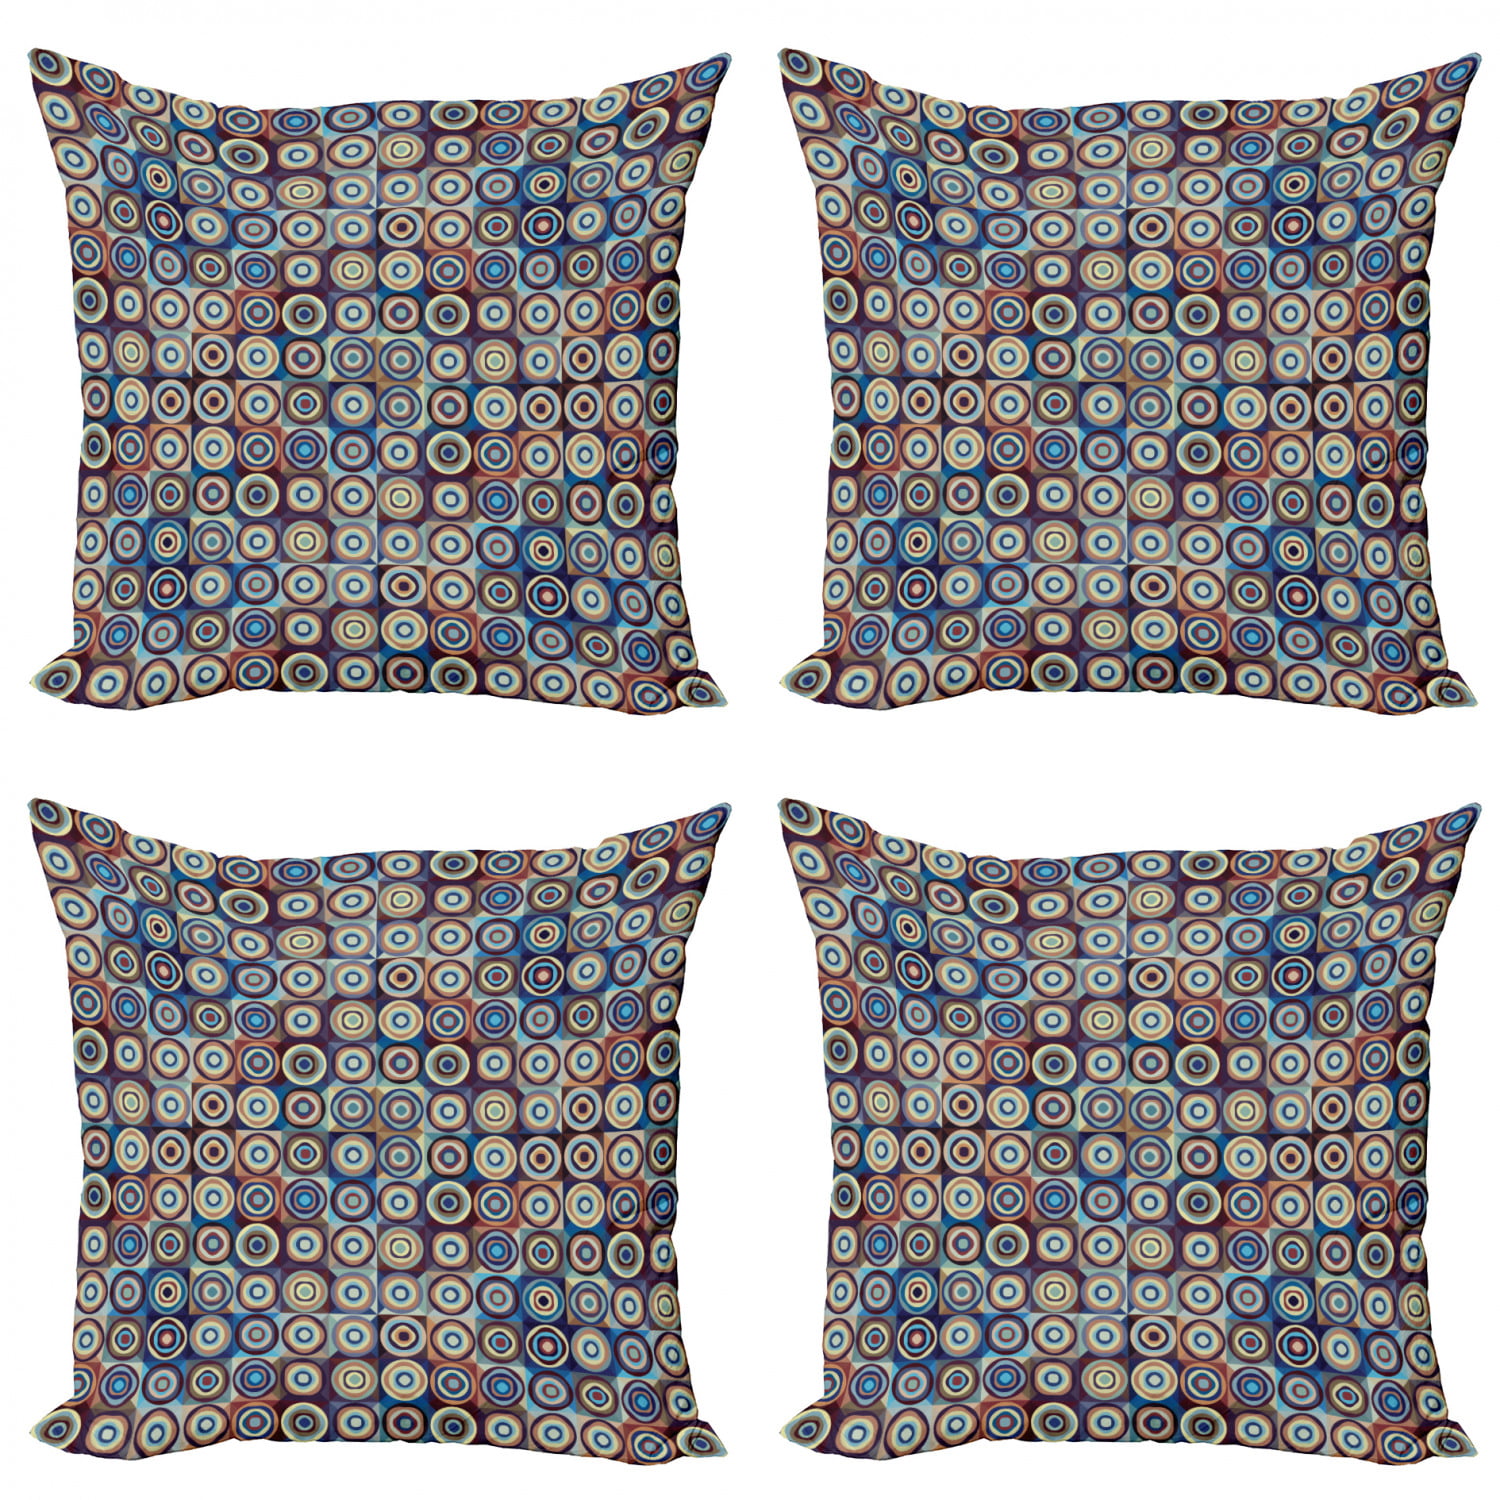 Pack of 2 Rectangle Pillows Cushion Cover Both Sides Modern Circles Rings 12x20" 